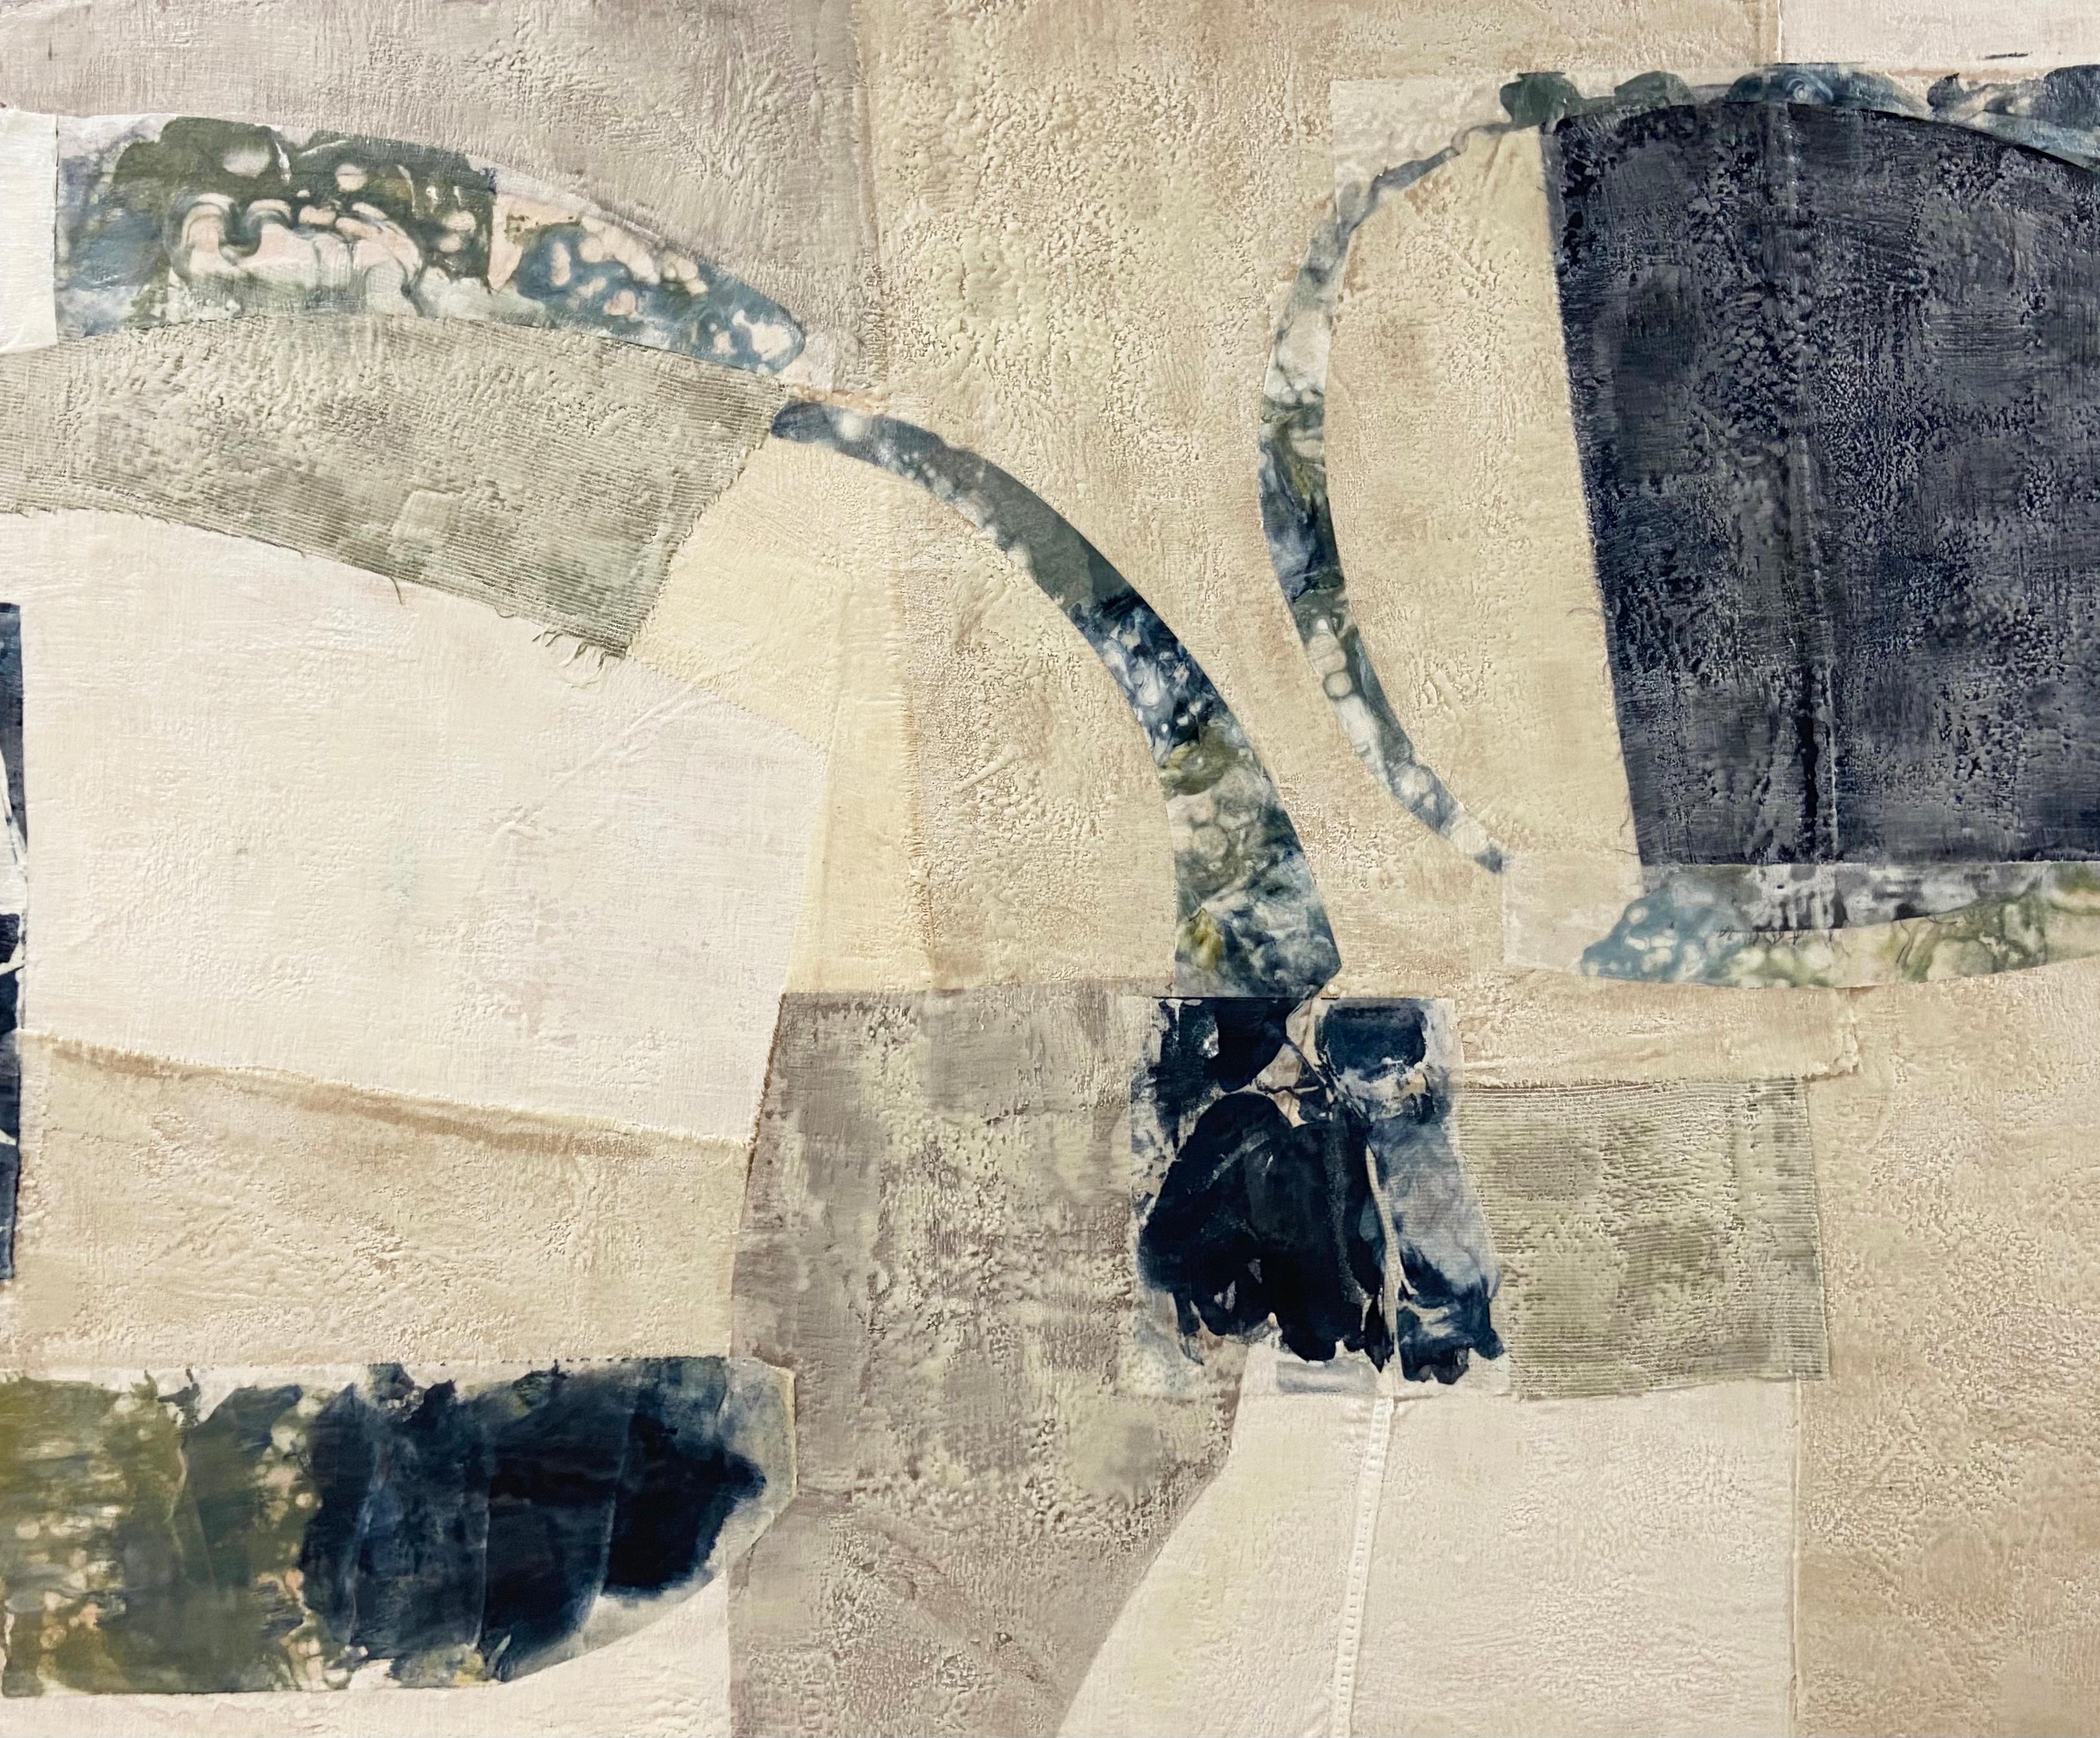 Happenings (Abstract Encaustic Fabric Painting on Panel in Navy, Green & Beige) - Mixed Media Art by Alaina Enslen